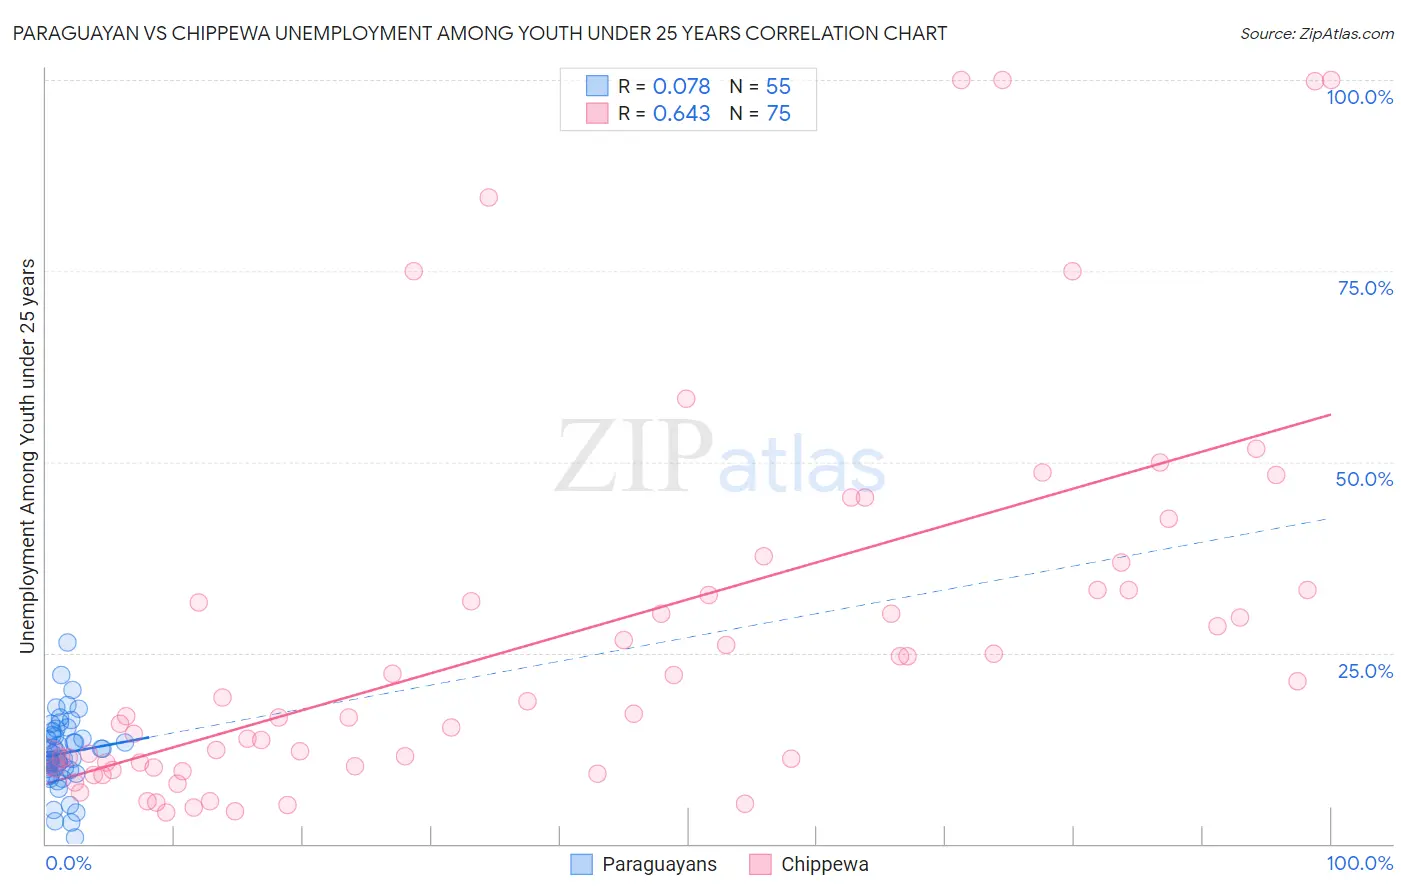 Paraguayan vs Chippewa Unemployment Among Youth under 25 years